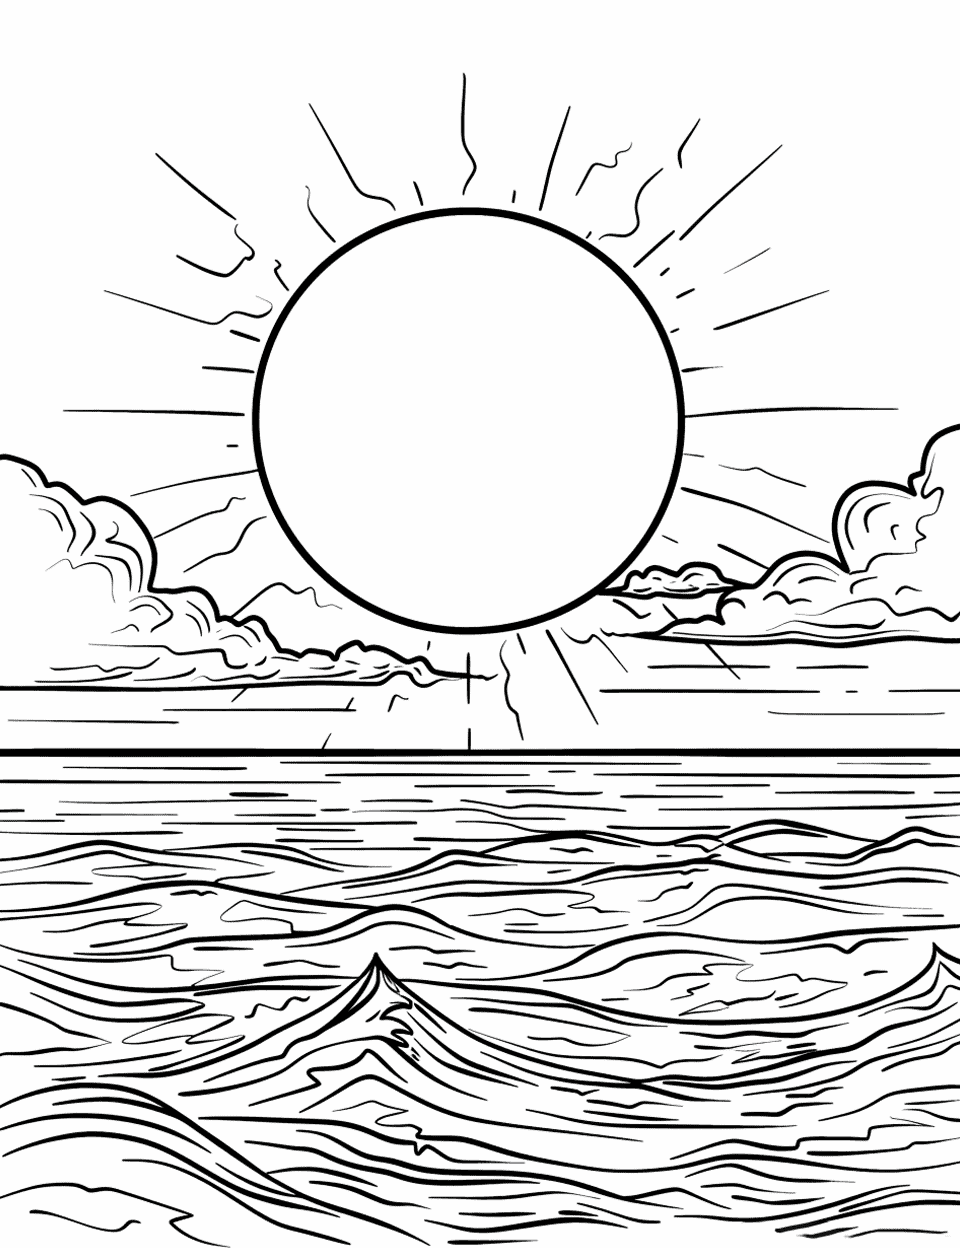 Ocean Sunset Sun Coloring Page - The sun is setting over the ocean, casting hues across the water.